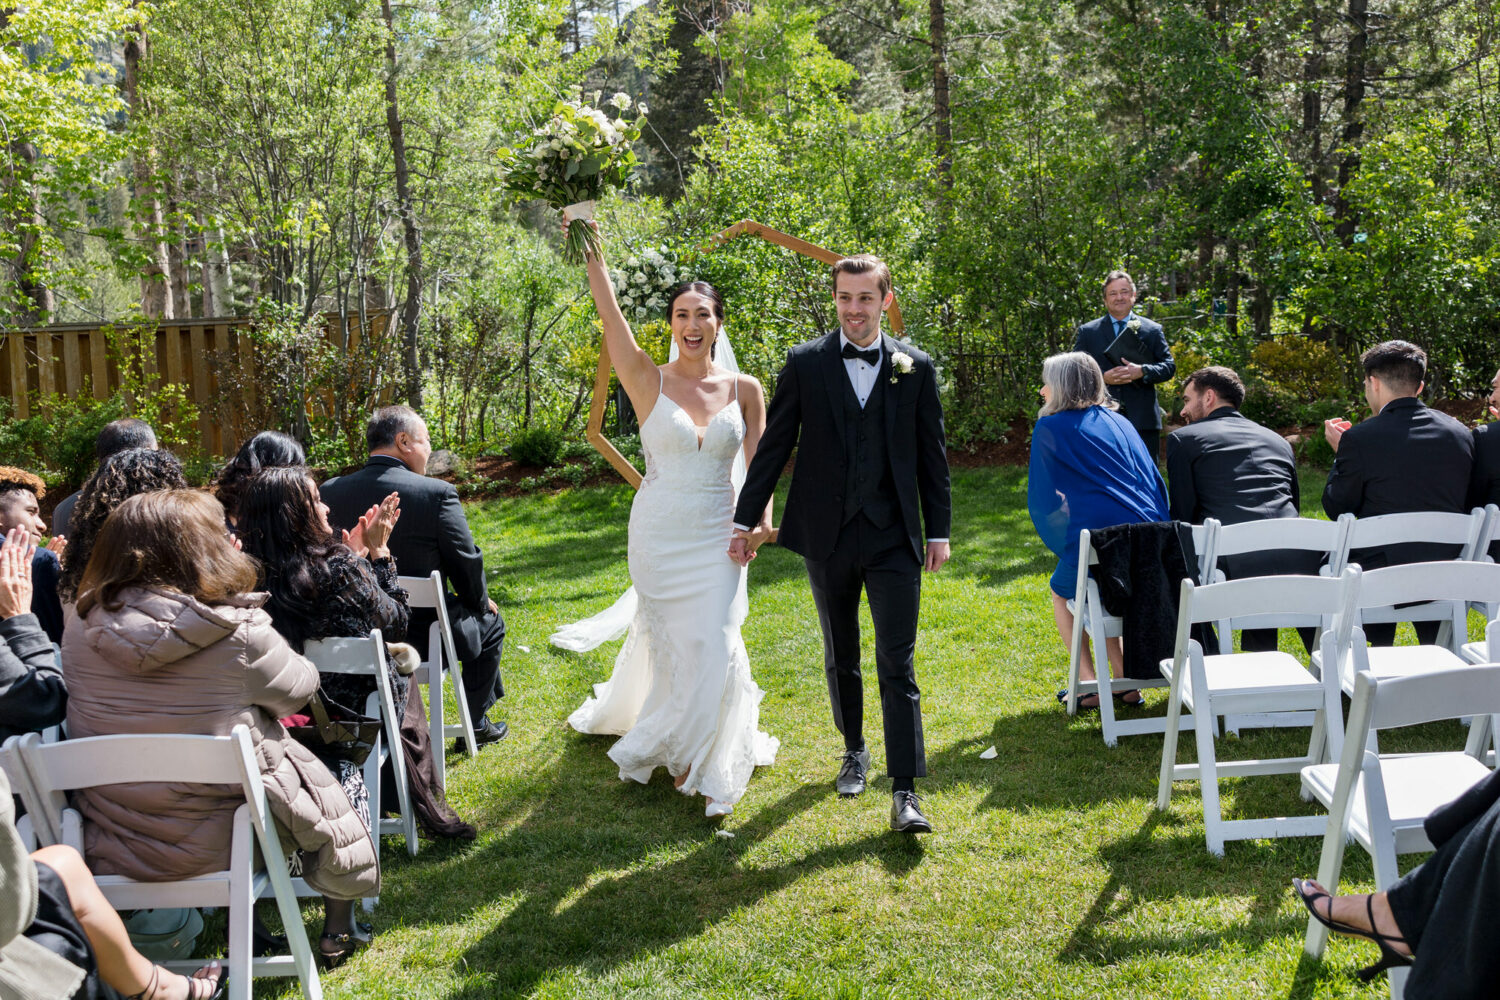 Walking down the aisle after getting married at Palisades Tahoe event center.